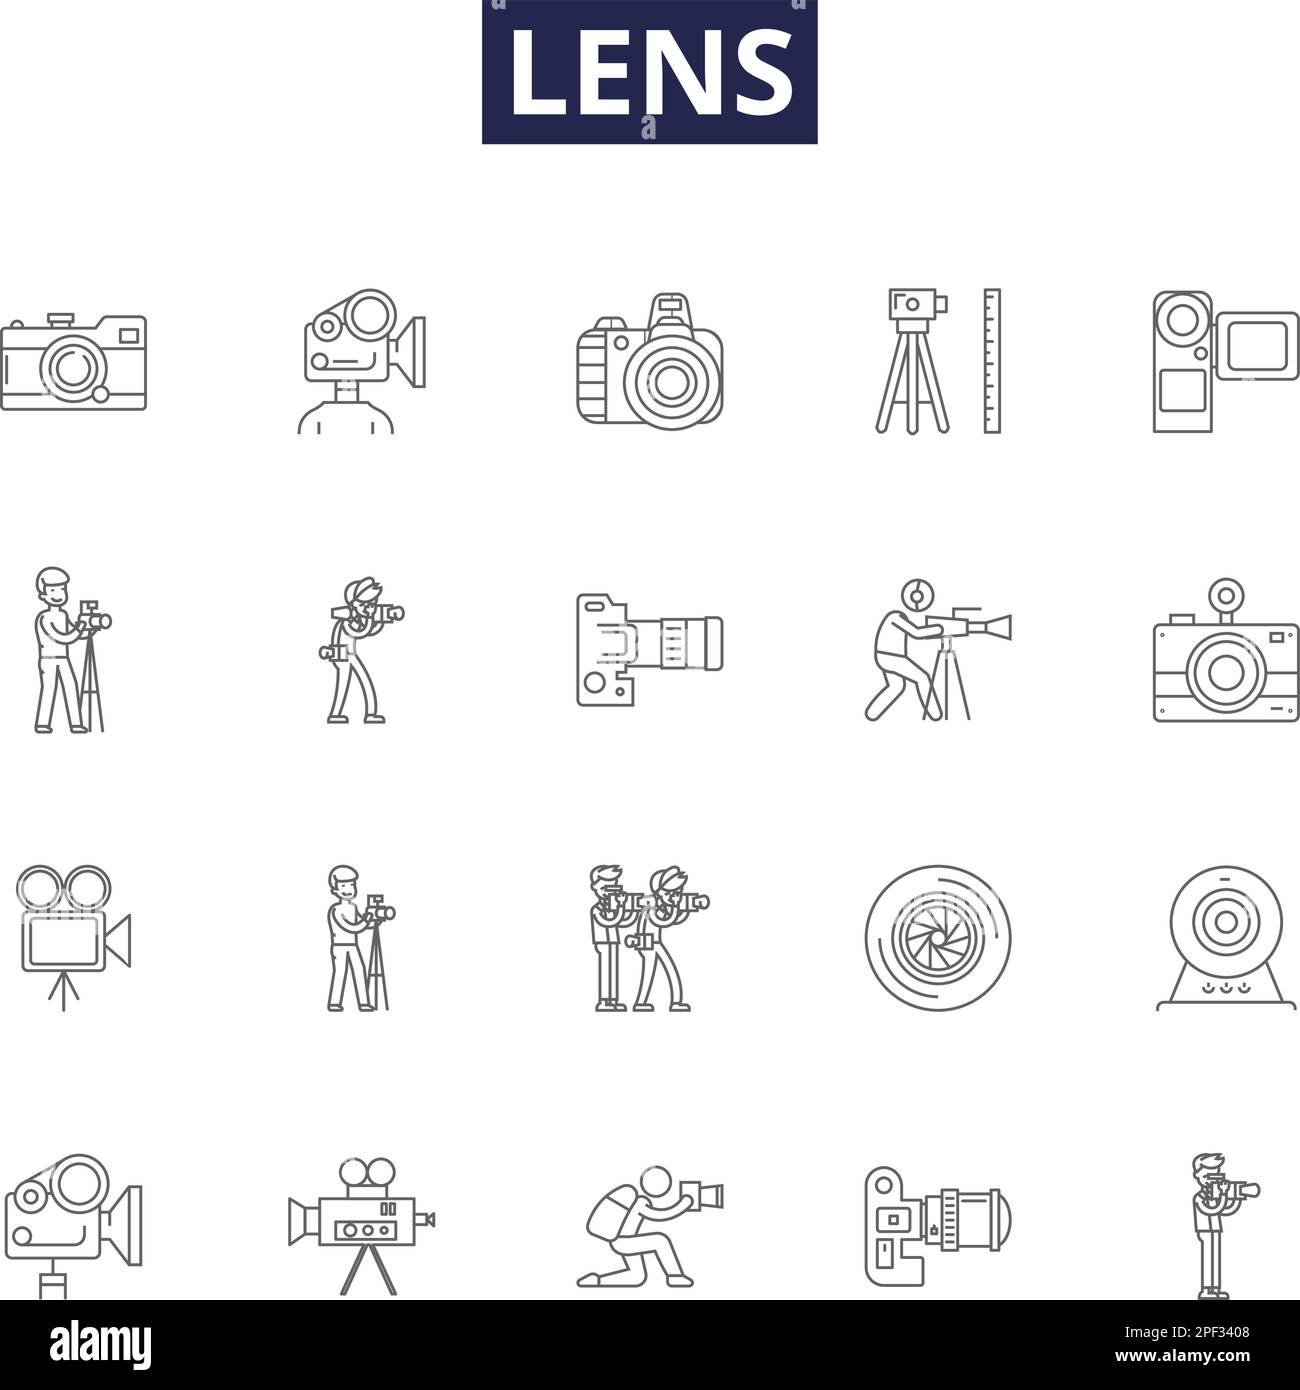 Lens line vector icons and signs. Optics, Convex, Concave, Focus, Photographic, Telescopic, Macro, Zoom outline vector illustration set Stock Vector